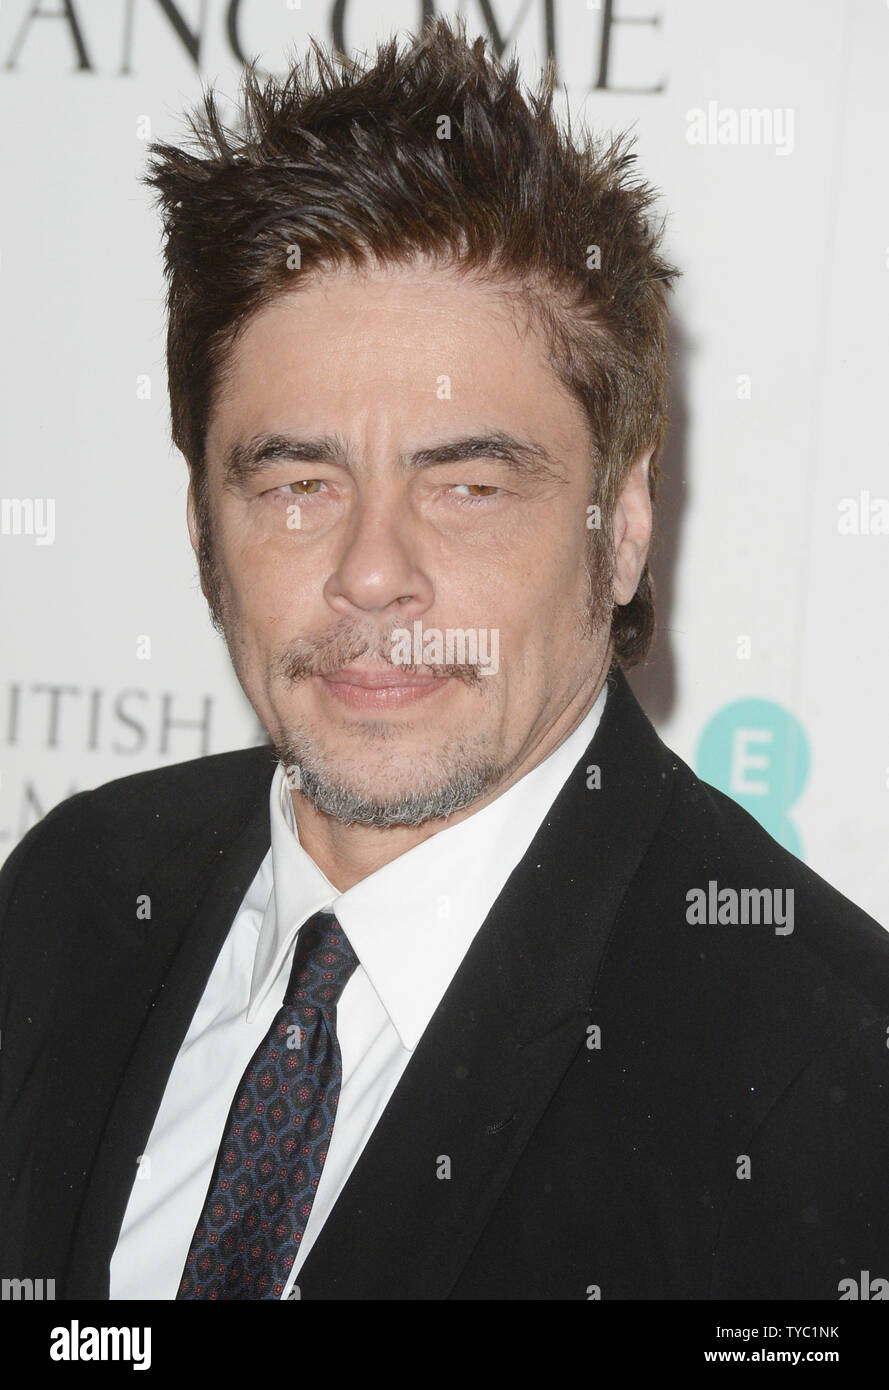 American actor Benicio Del Toro attends the EE British Academy Film Awards Nominees Party at Kensington Palace in London on February 13, 2016.     UPI/ Rune Hellestad Stock Photo